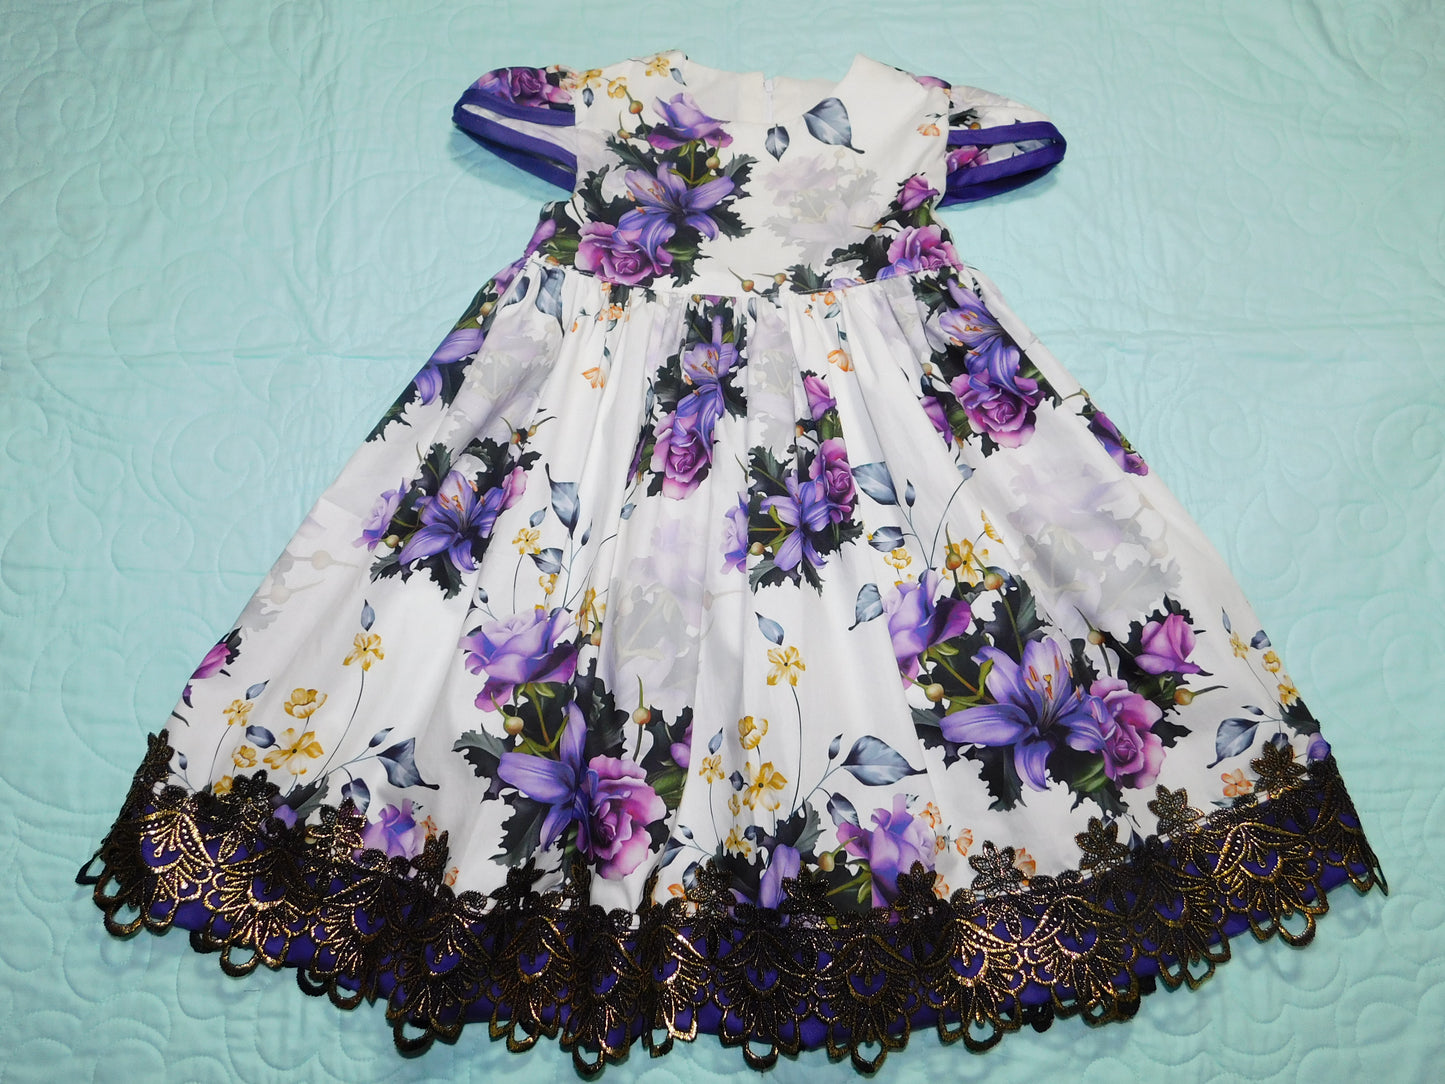 Dress - Exquisite Collection - Purple Lillium Flower, Purple Bias Binding on Sleeves and Black/Gold Lace Trim on Hemline